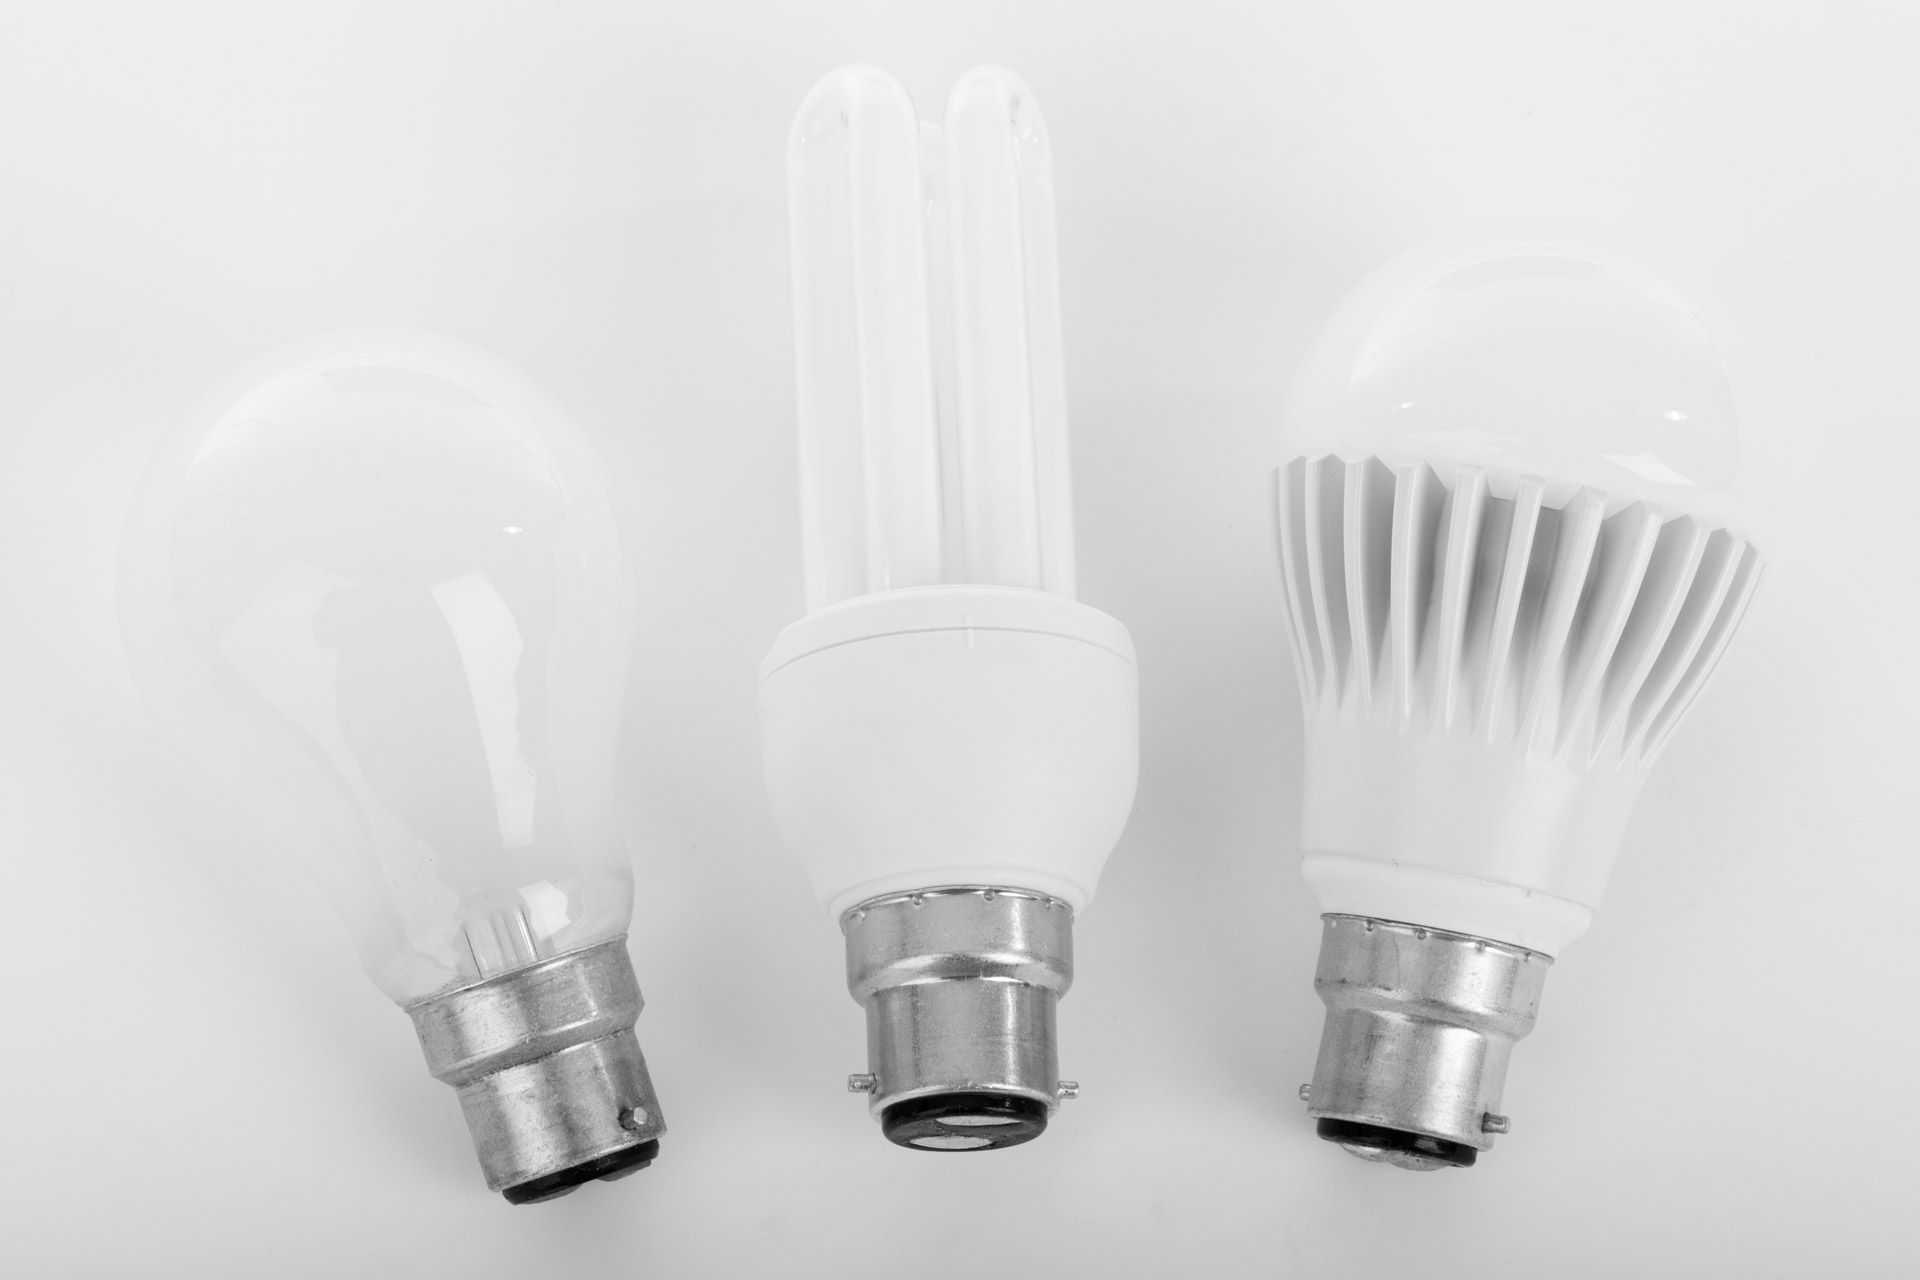 incandescent compact fluorescent cfl free photo